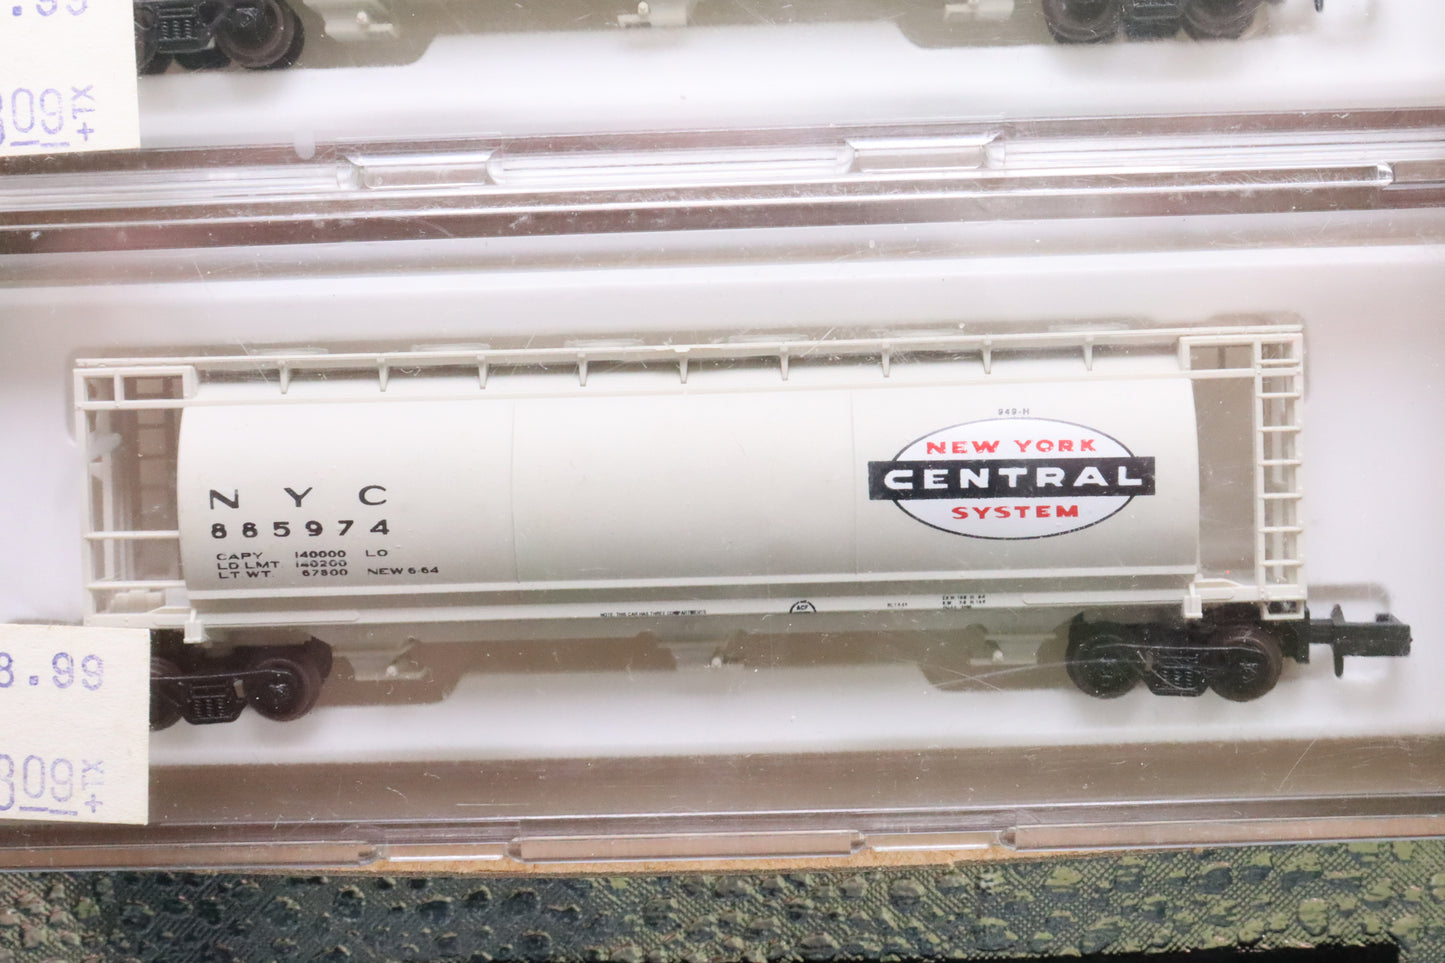 Delaware Valley - 3053 - 3-Pack - 3-Bay Cylindrical Hoppers - New York Central - NYC-885974/885985/885957